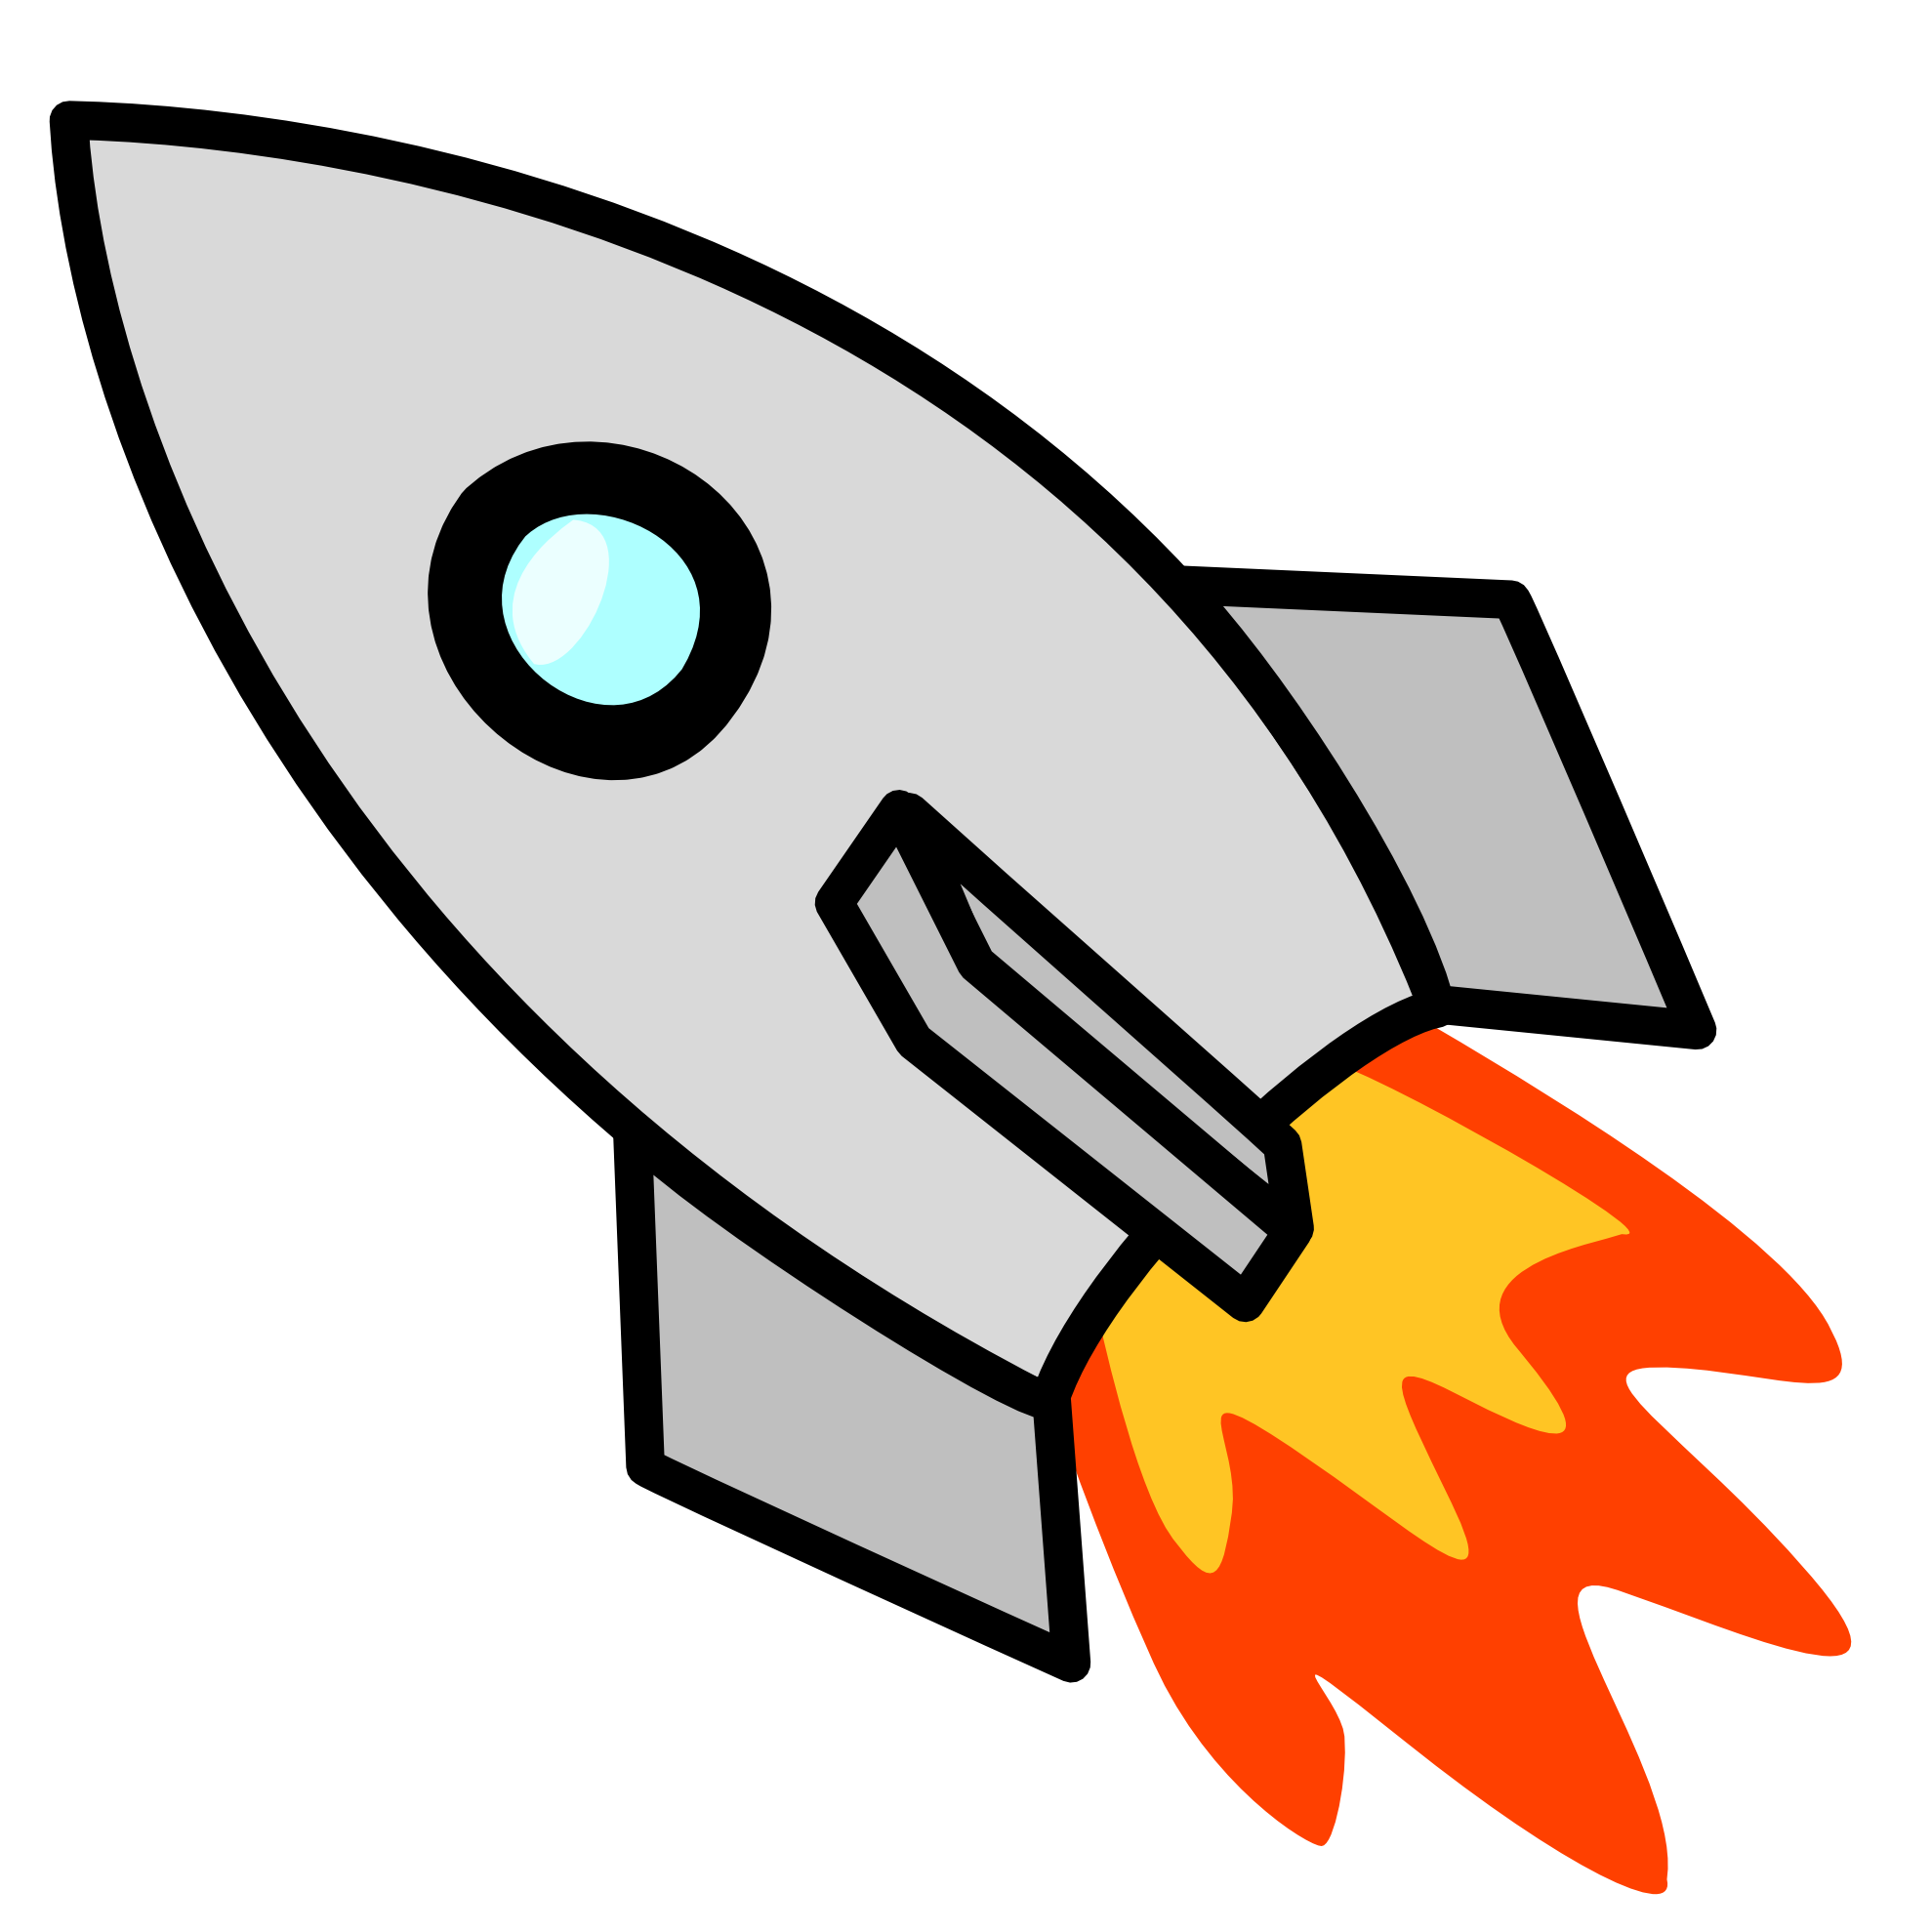 Spaceship clipart images clipart